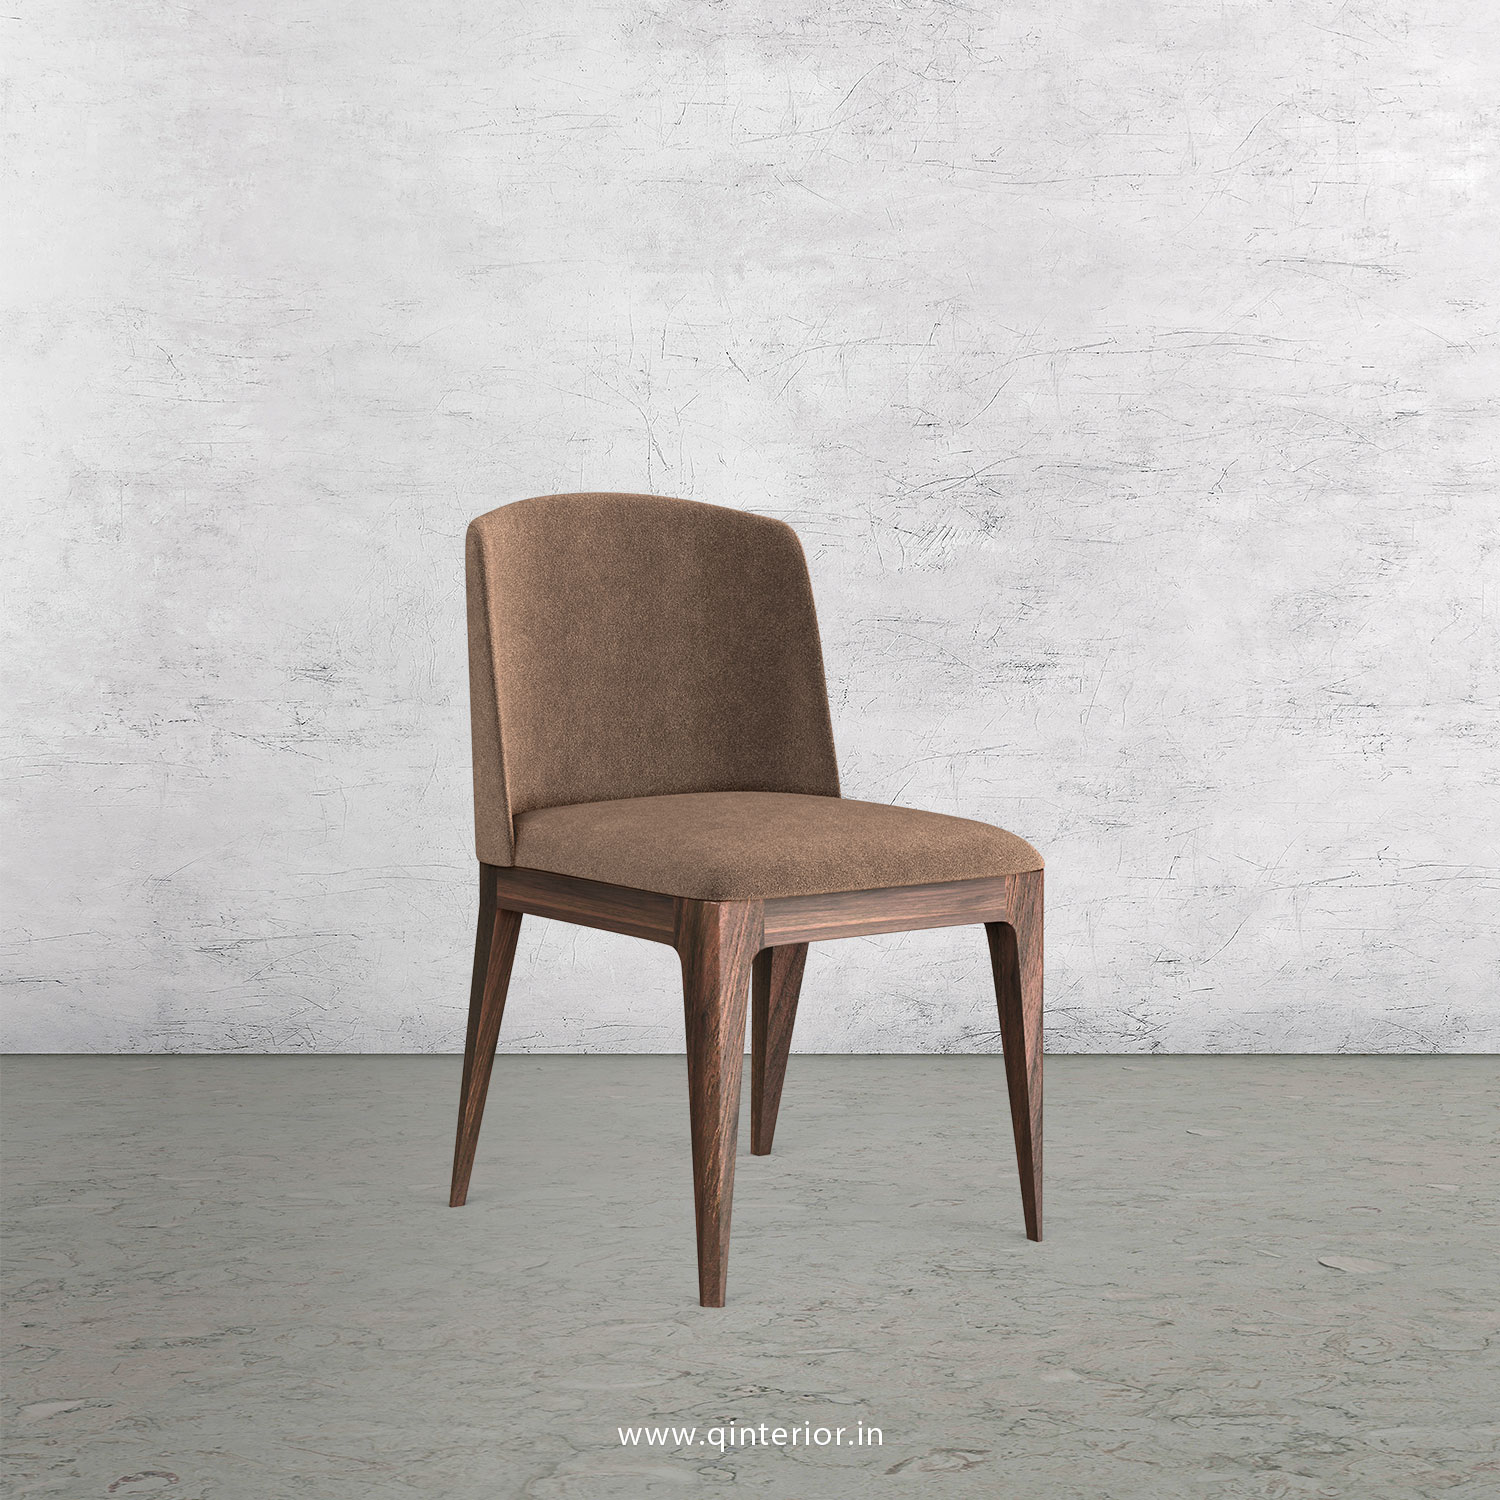 Cario Dining Chair in Velvet Fabric - DCH001 VL02